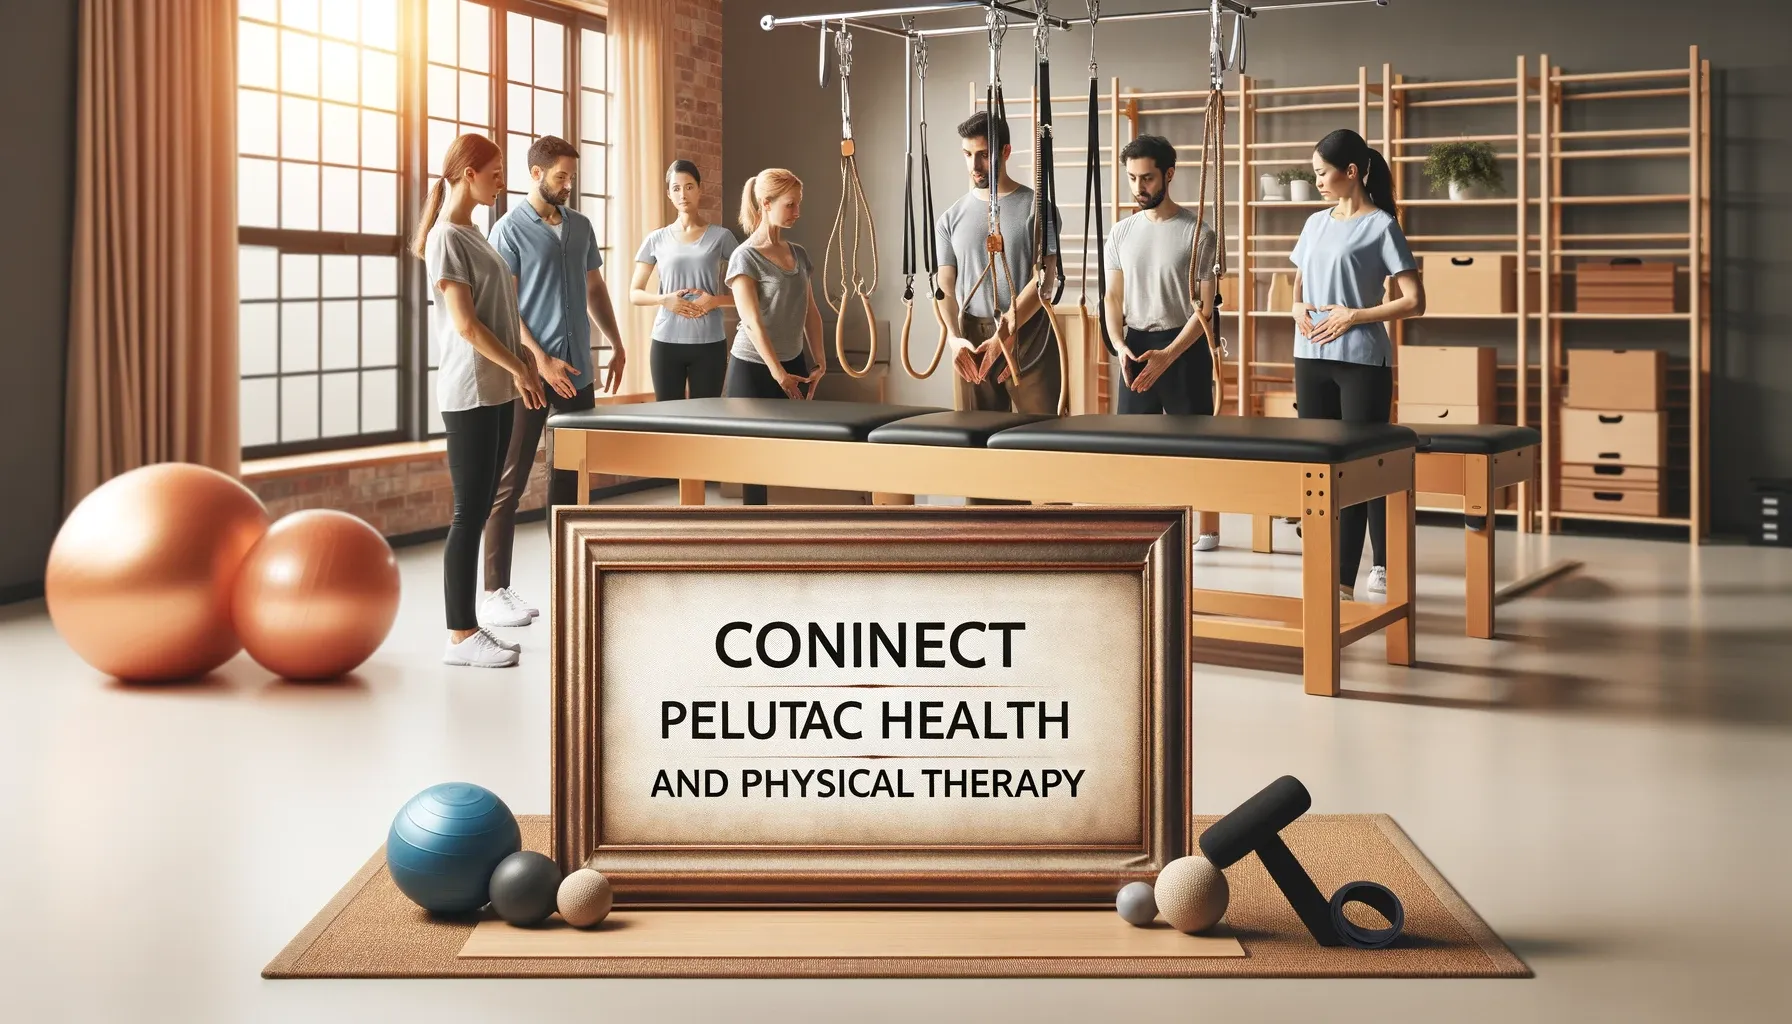 Connect Pelvic Health and Physical Therapy